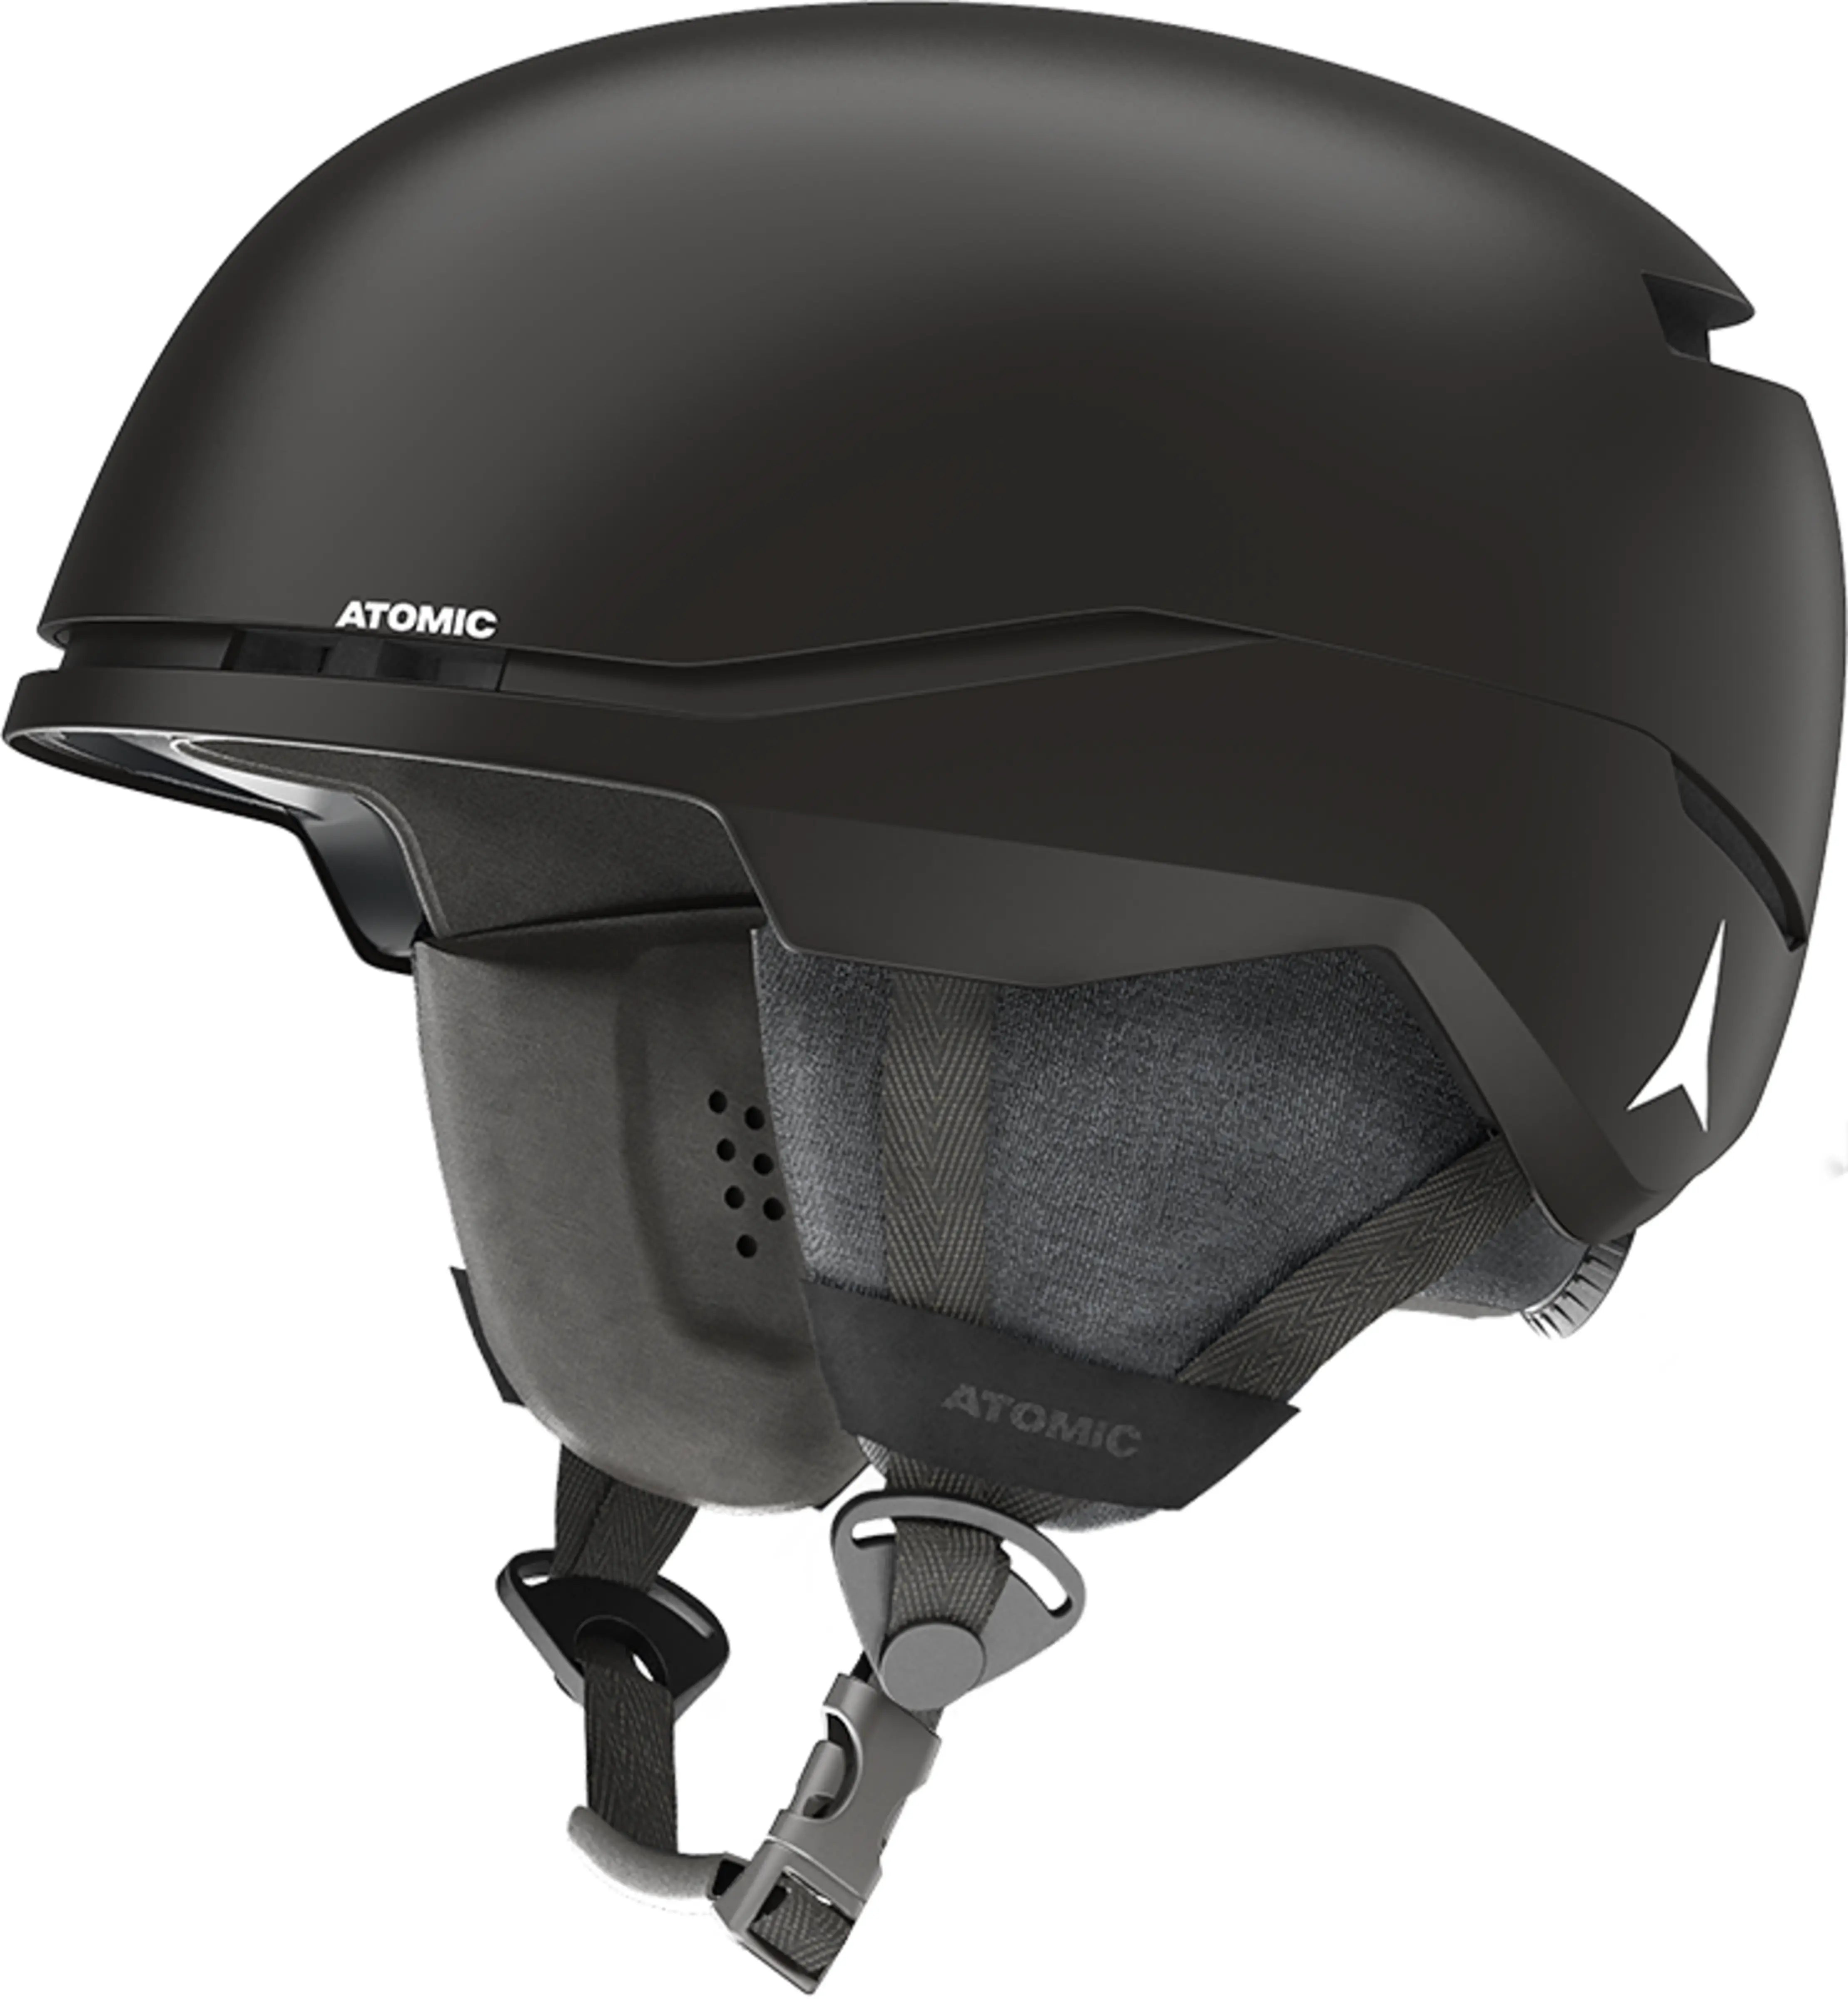 Atomic Four AMID helmet is a hugely popular model from the Atomic Four family, which brings a totally fresh approach to all-mountain helmet design.